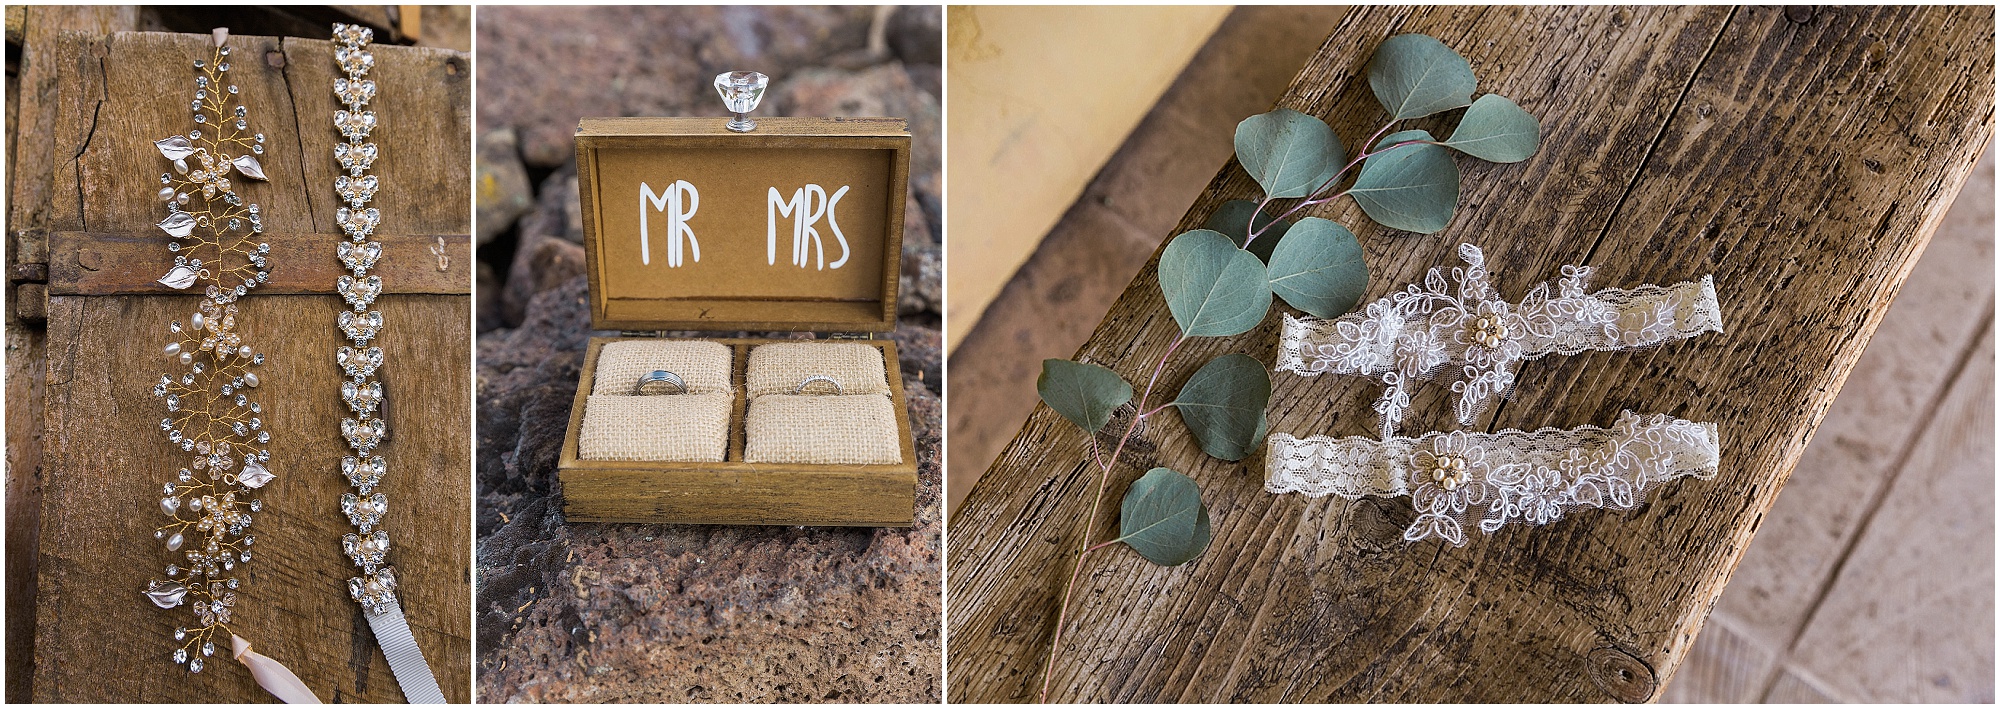 Wedding details, such as your rings, garters, and jewelry are all important parts to your wedding story. Photographed by Bend Oregon wedding photographer Erica Swantek Photography